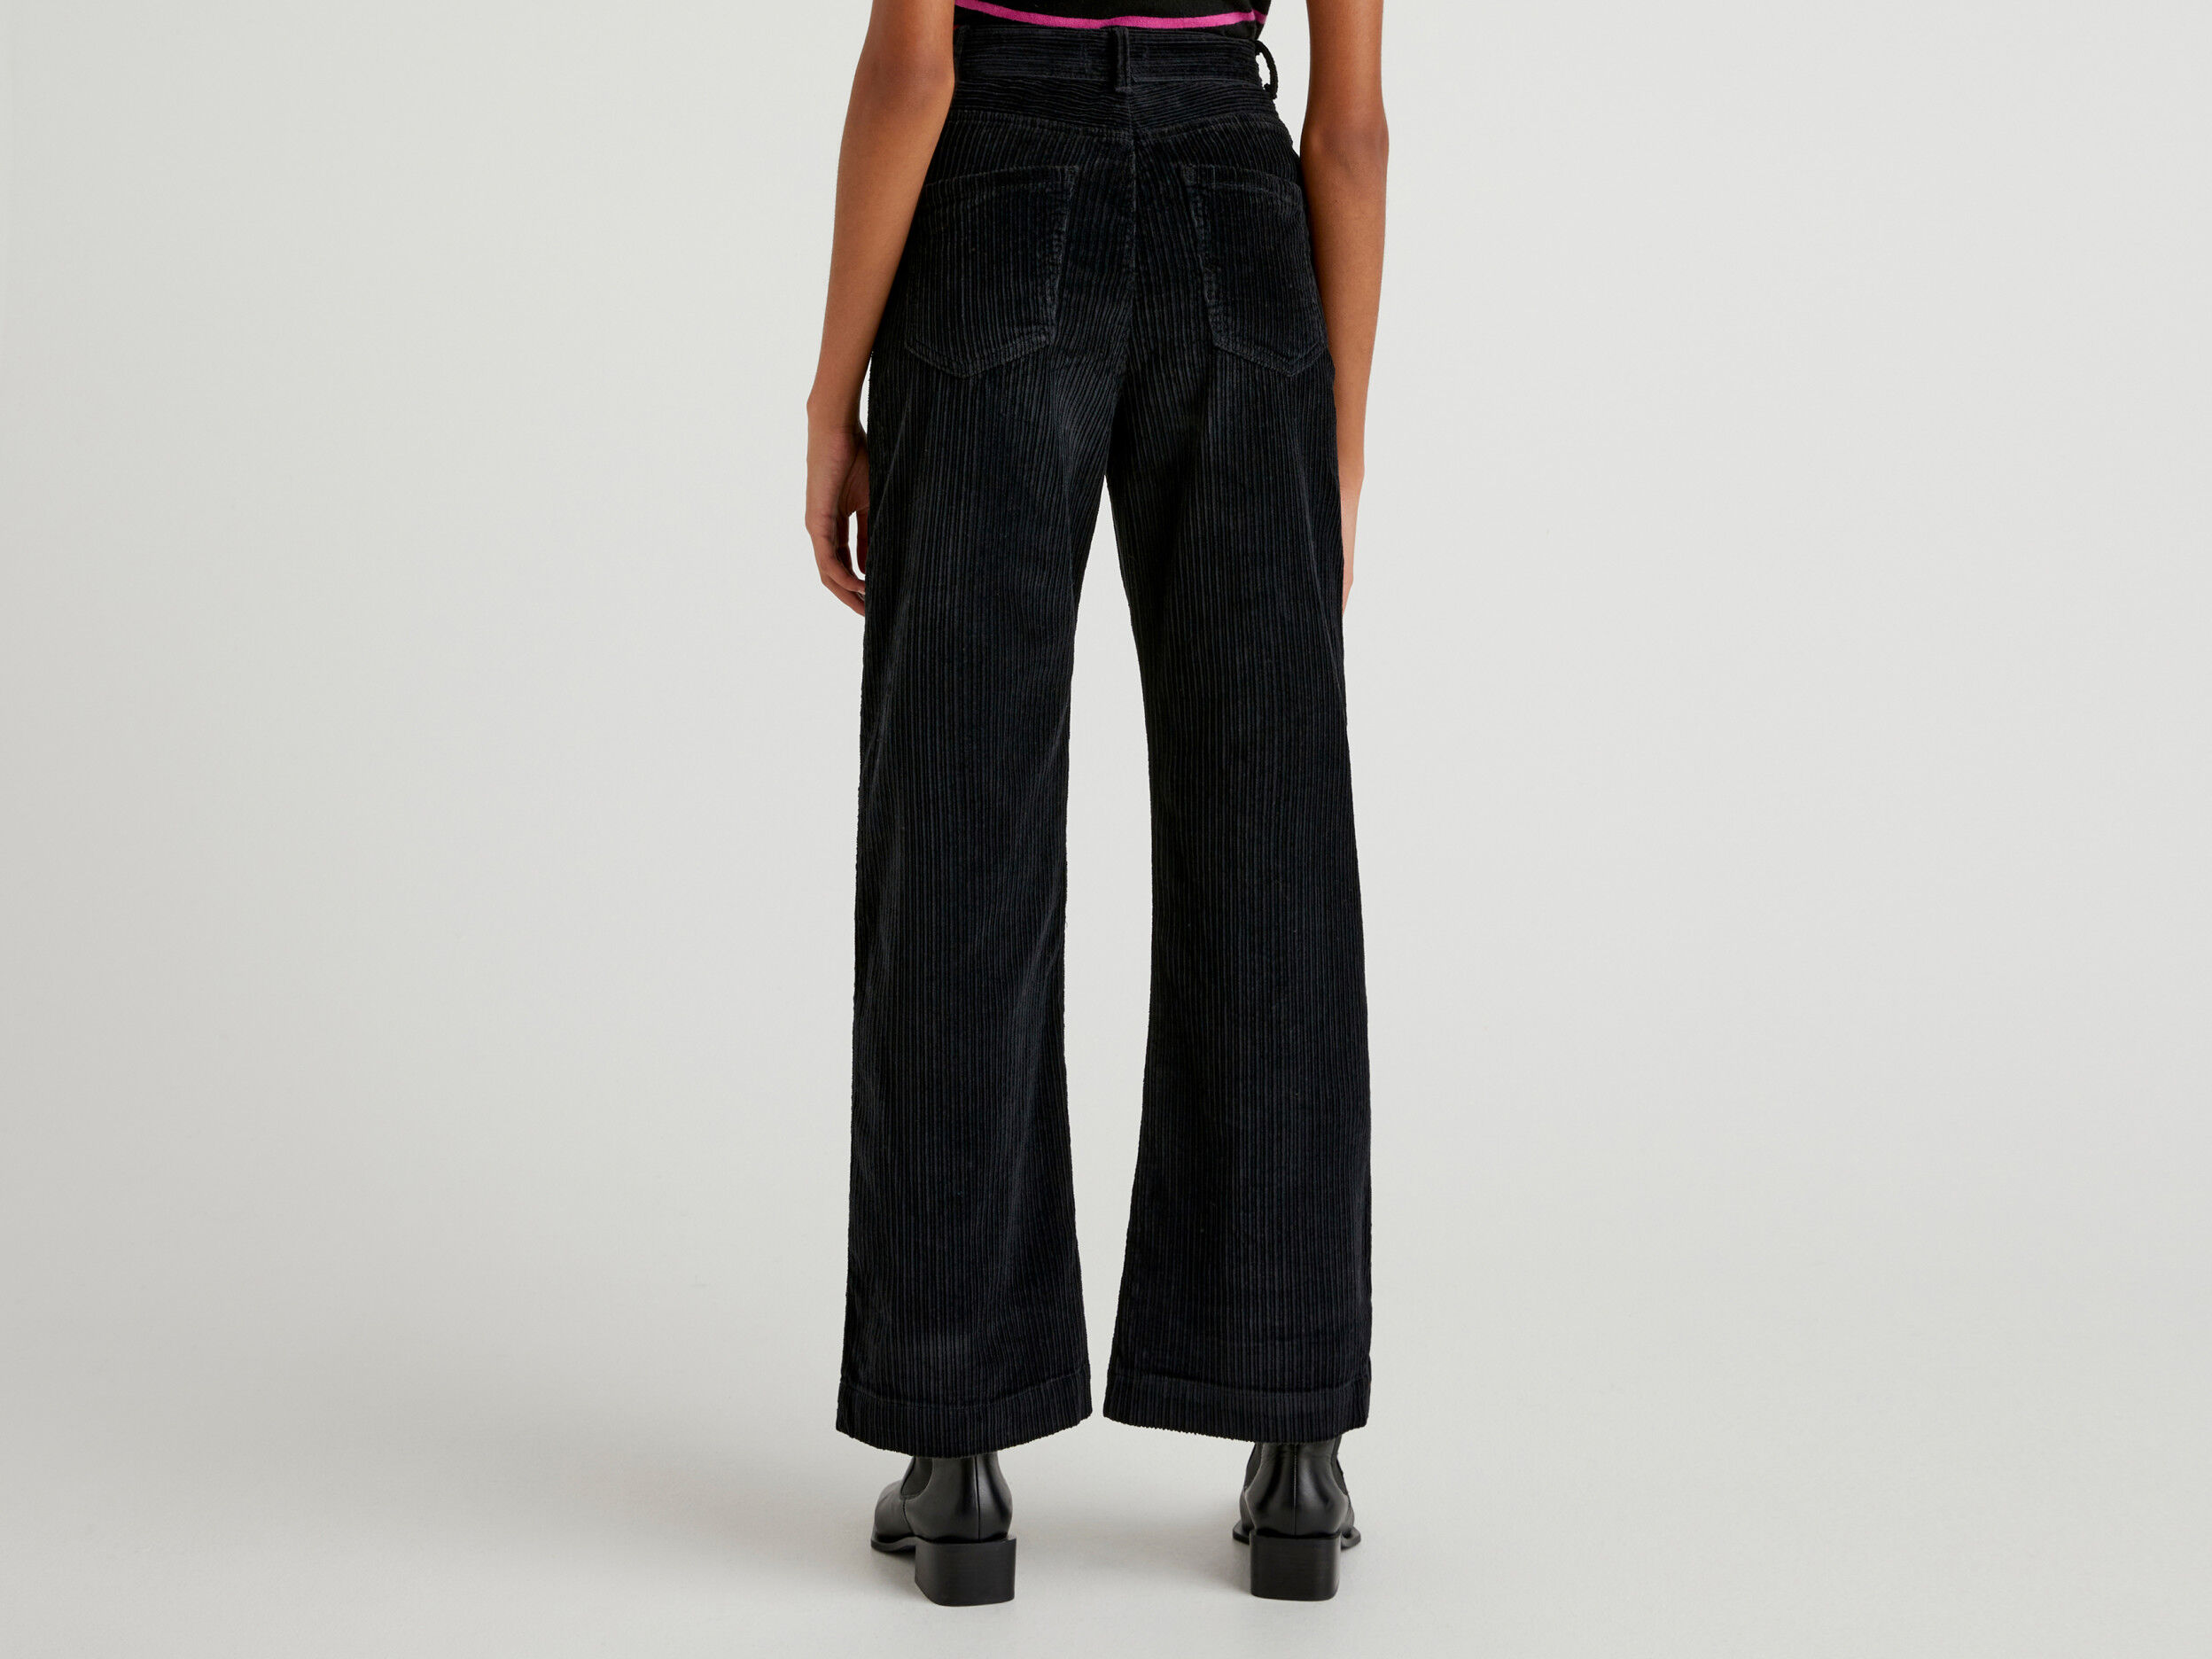 Maine Womens/Ladies Velvet Tapered Trousers | Discounts on great Brands